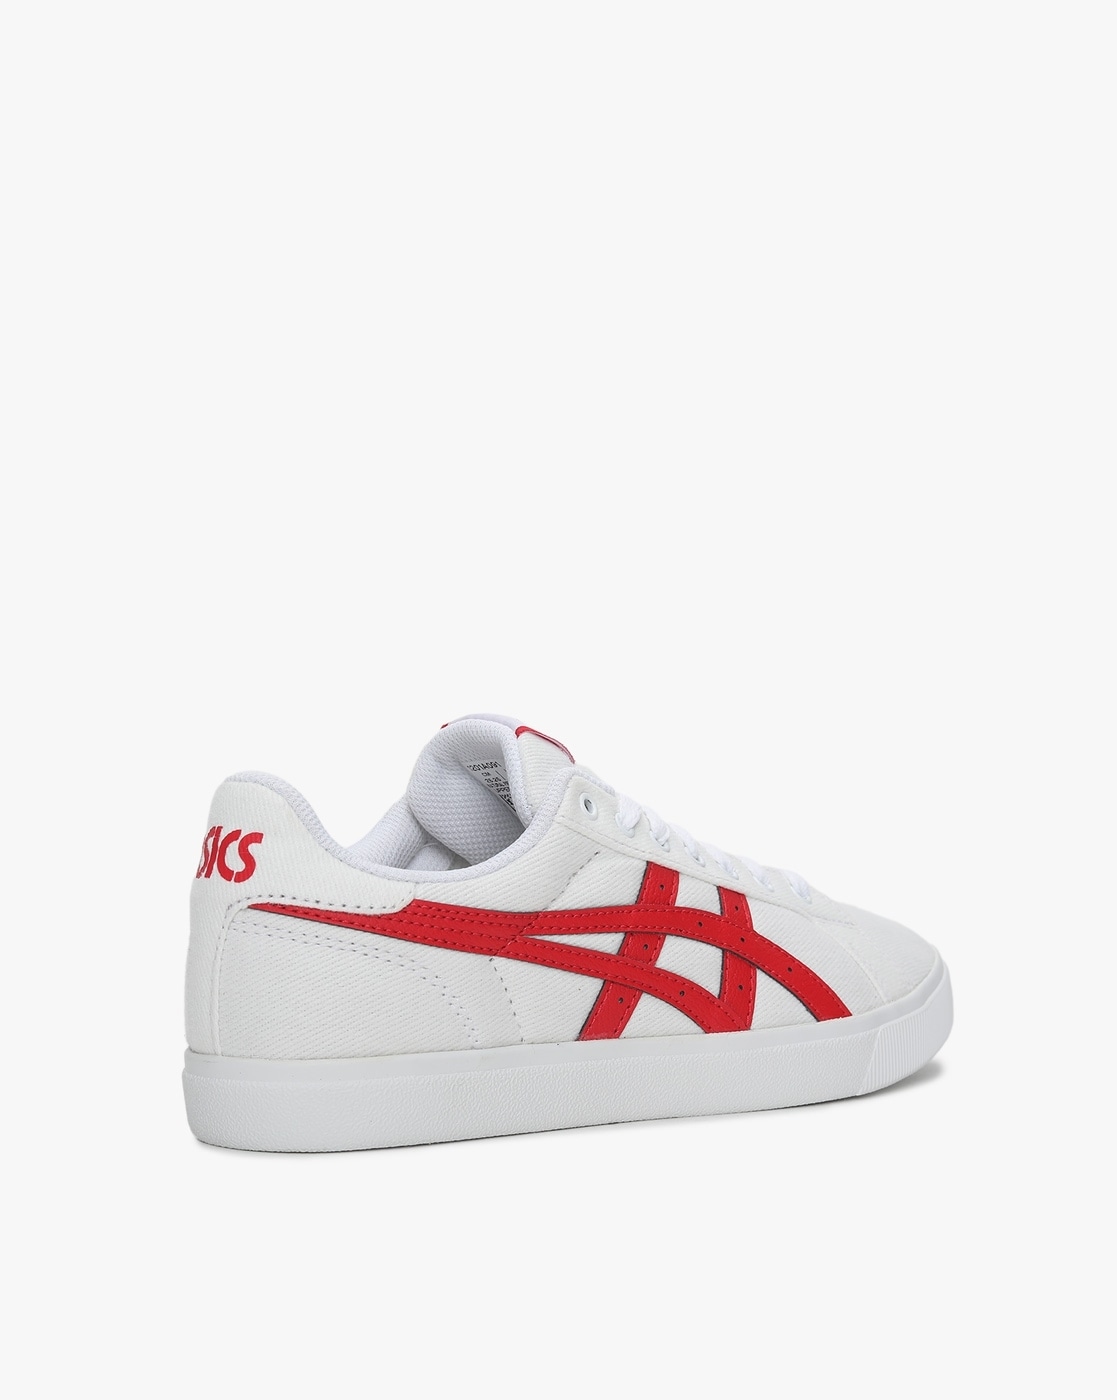 asics casual shoes white